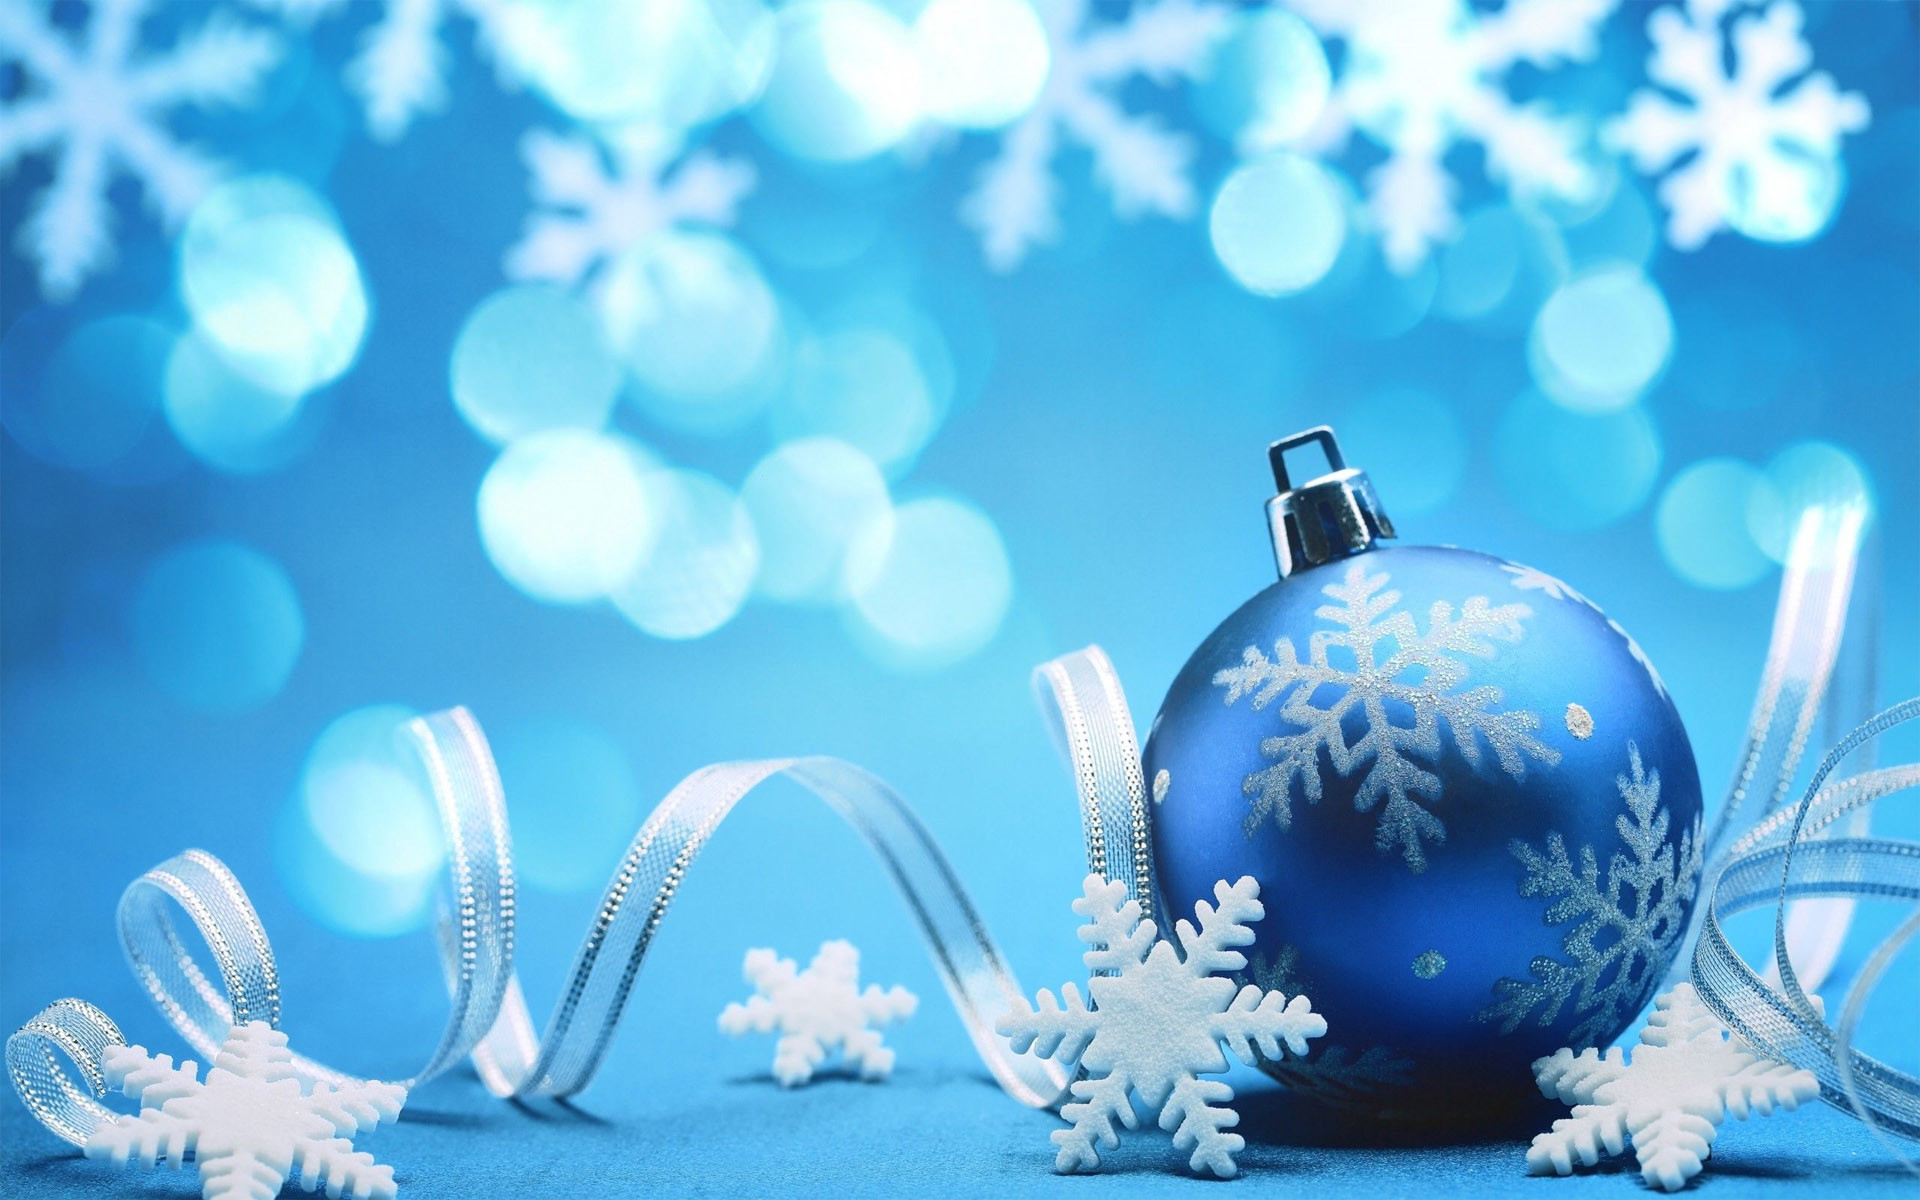 1920x1200 Free download 72 Blue Christmas Wallpapers on WallpaperPlay [] for your Desktop, Mobile \u0026 Tablet | Explore 62+ Xmas Wallpapers | Christmas Wallpapers For Desktop, Windows 7 Xmas Wallpaper, Free Xmas Wallpaper Desktop Themes